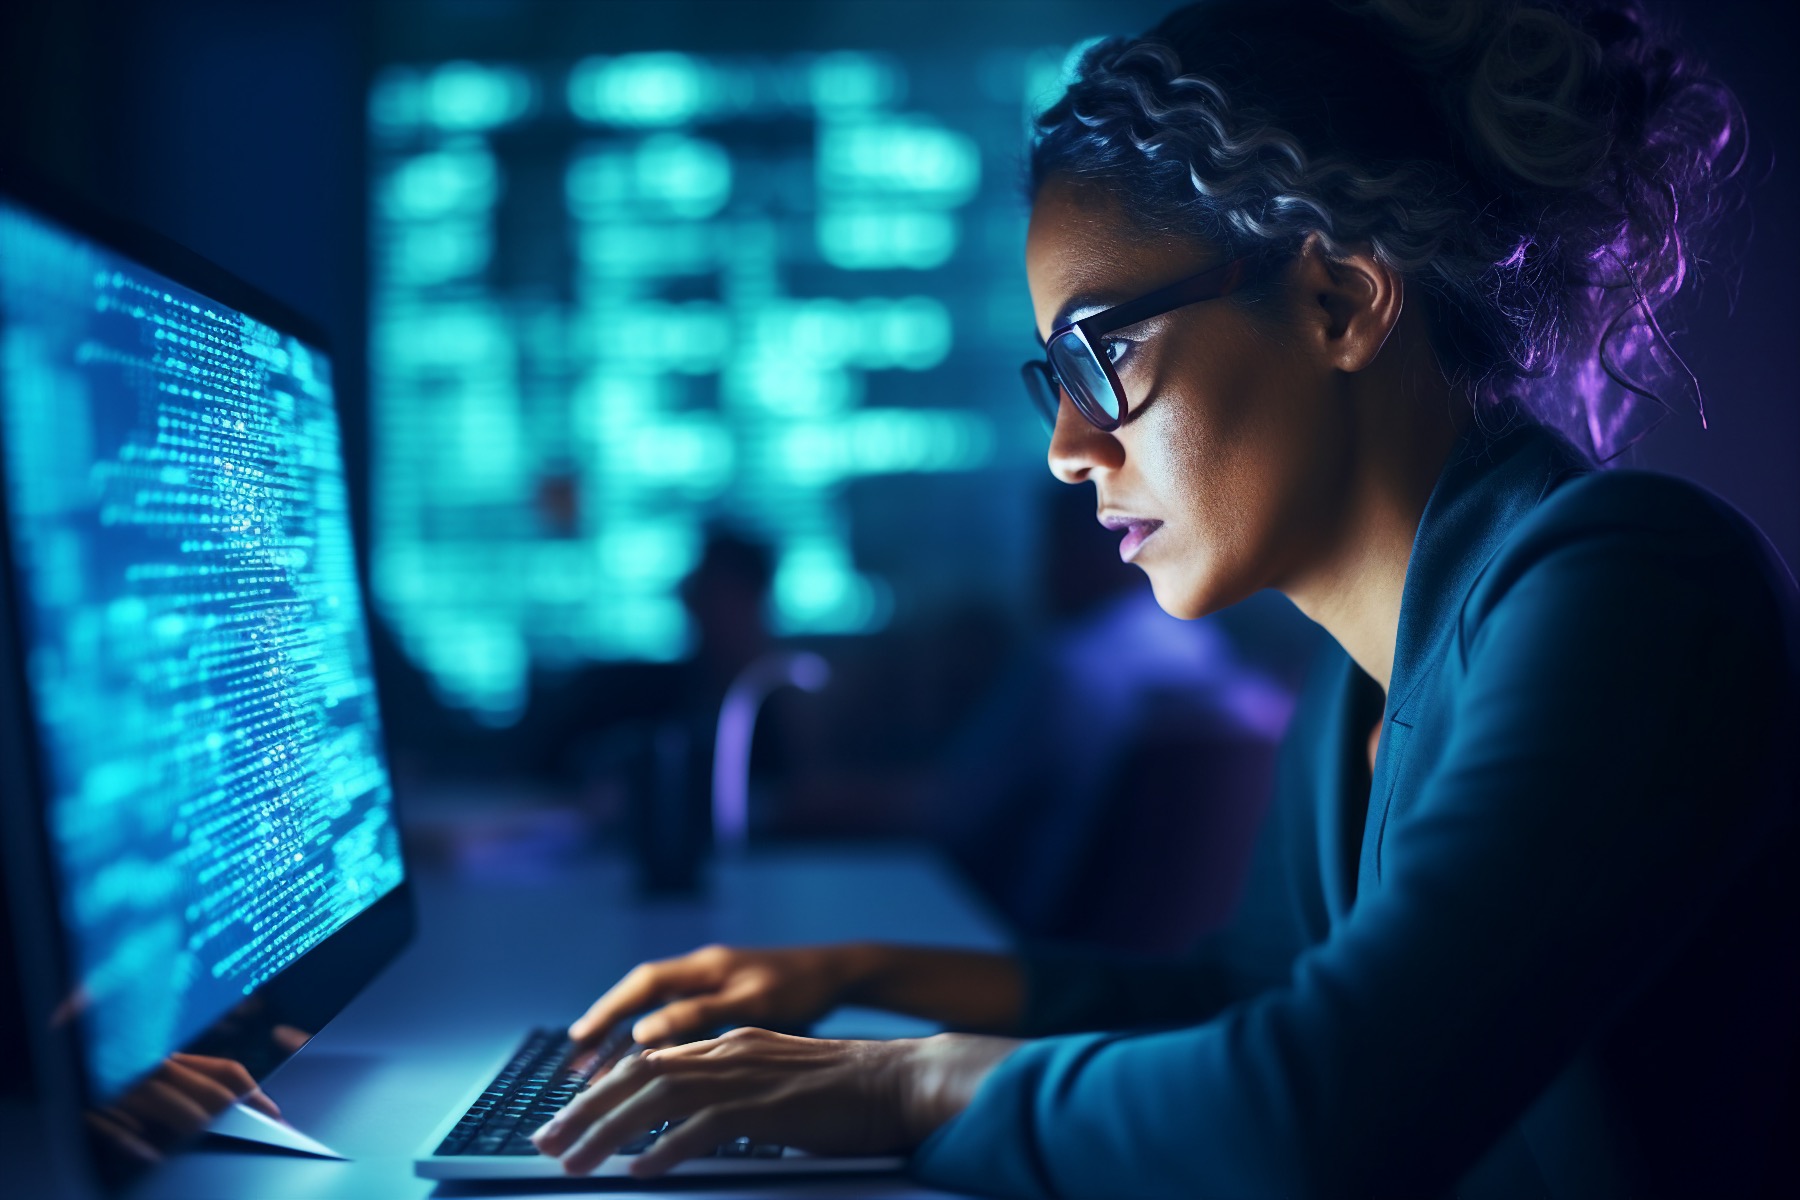 woman with glasses working at a computer working on cyber code